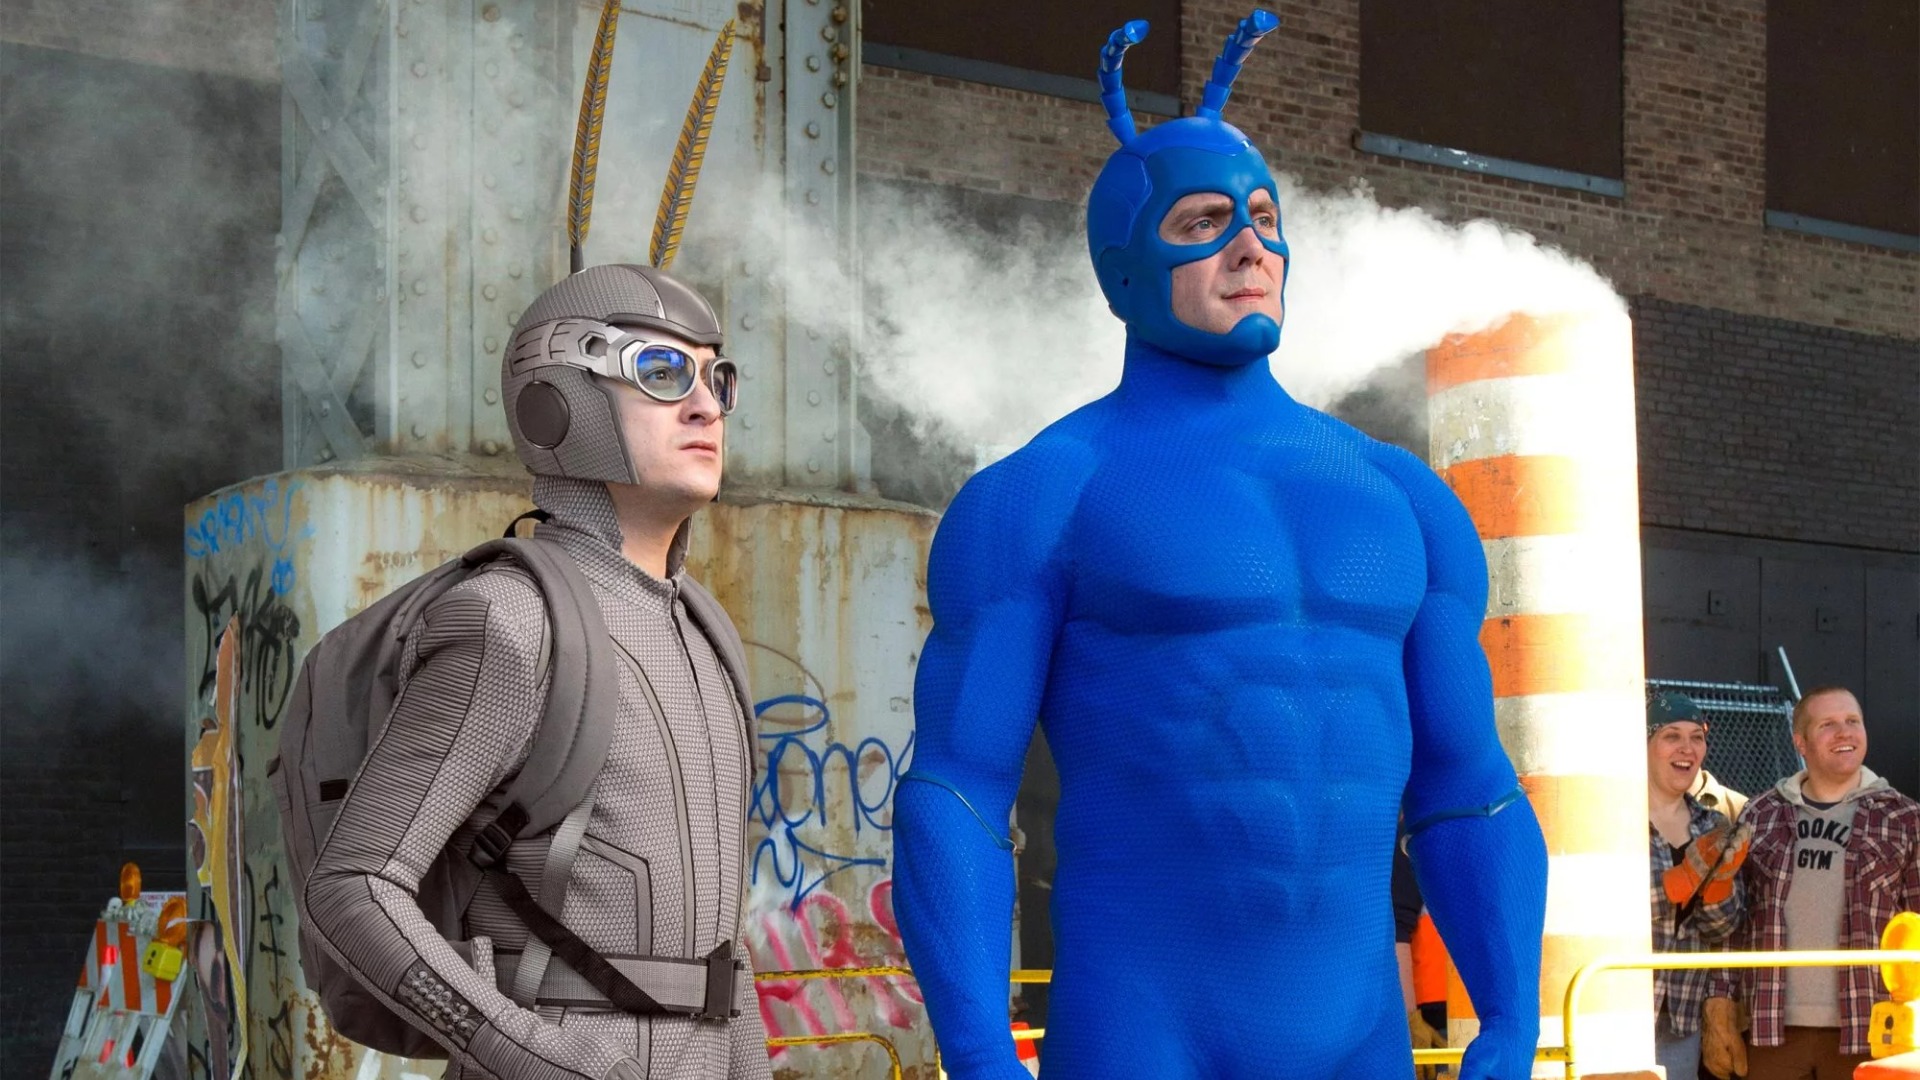 Best shows on Amazon Prime - The Tick